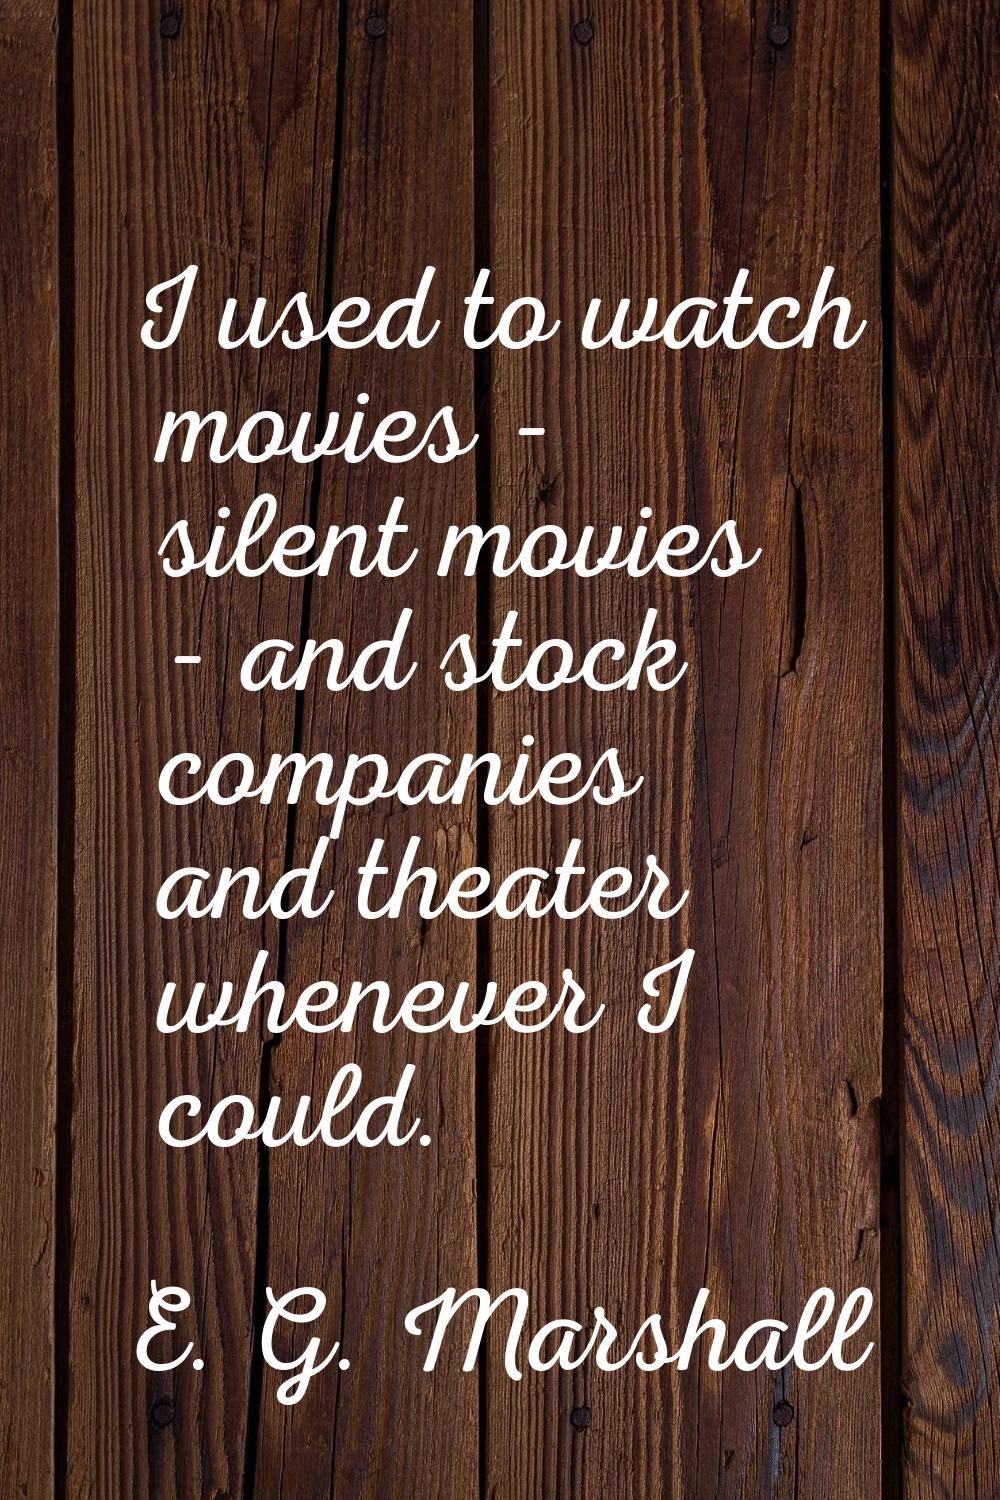 I used to watch movies - silent movies - and stock companies and theater whenever I could.